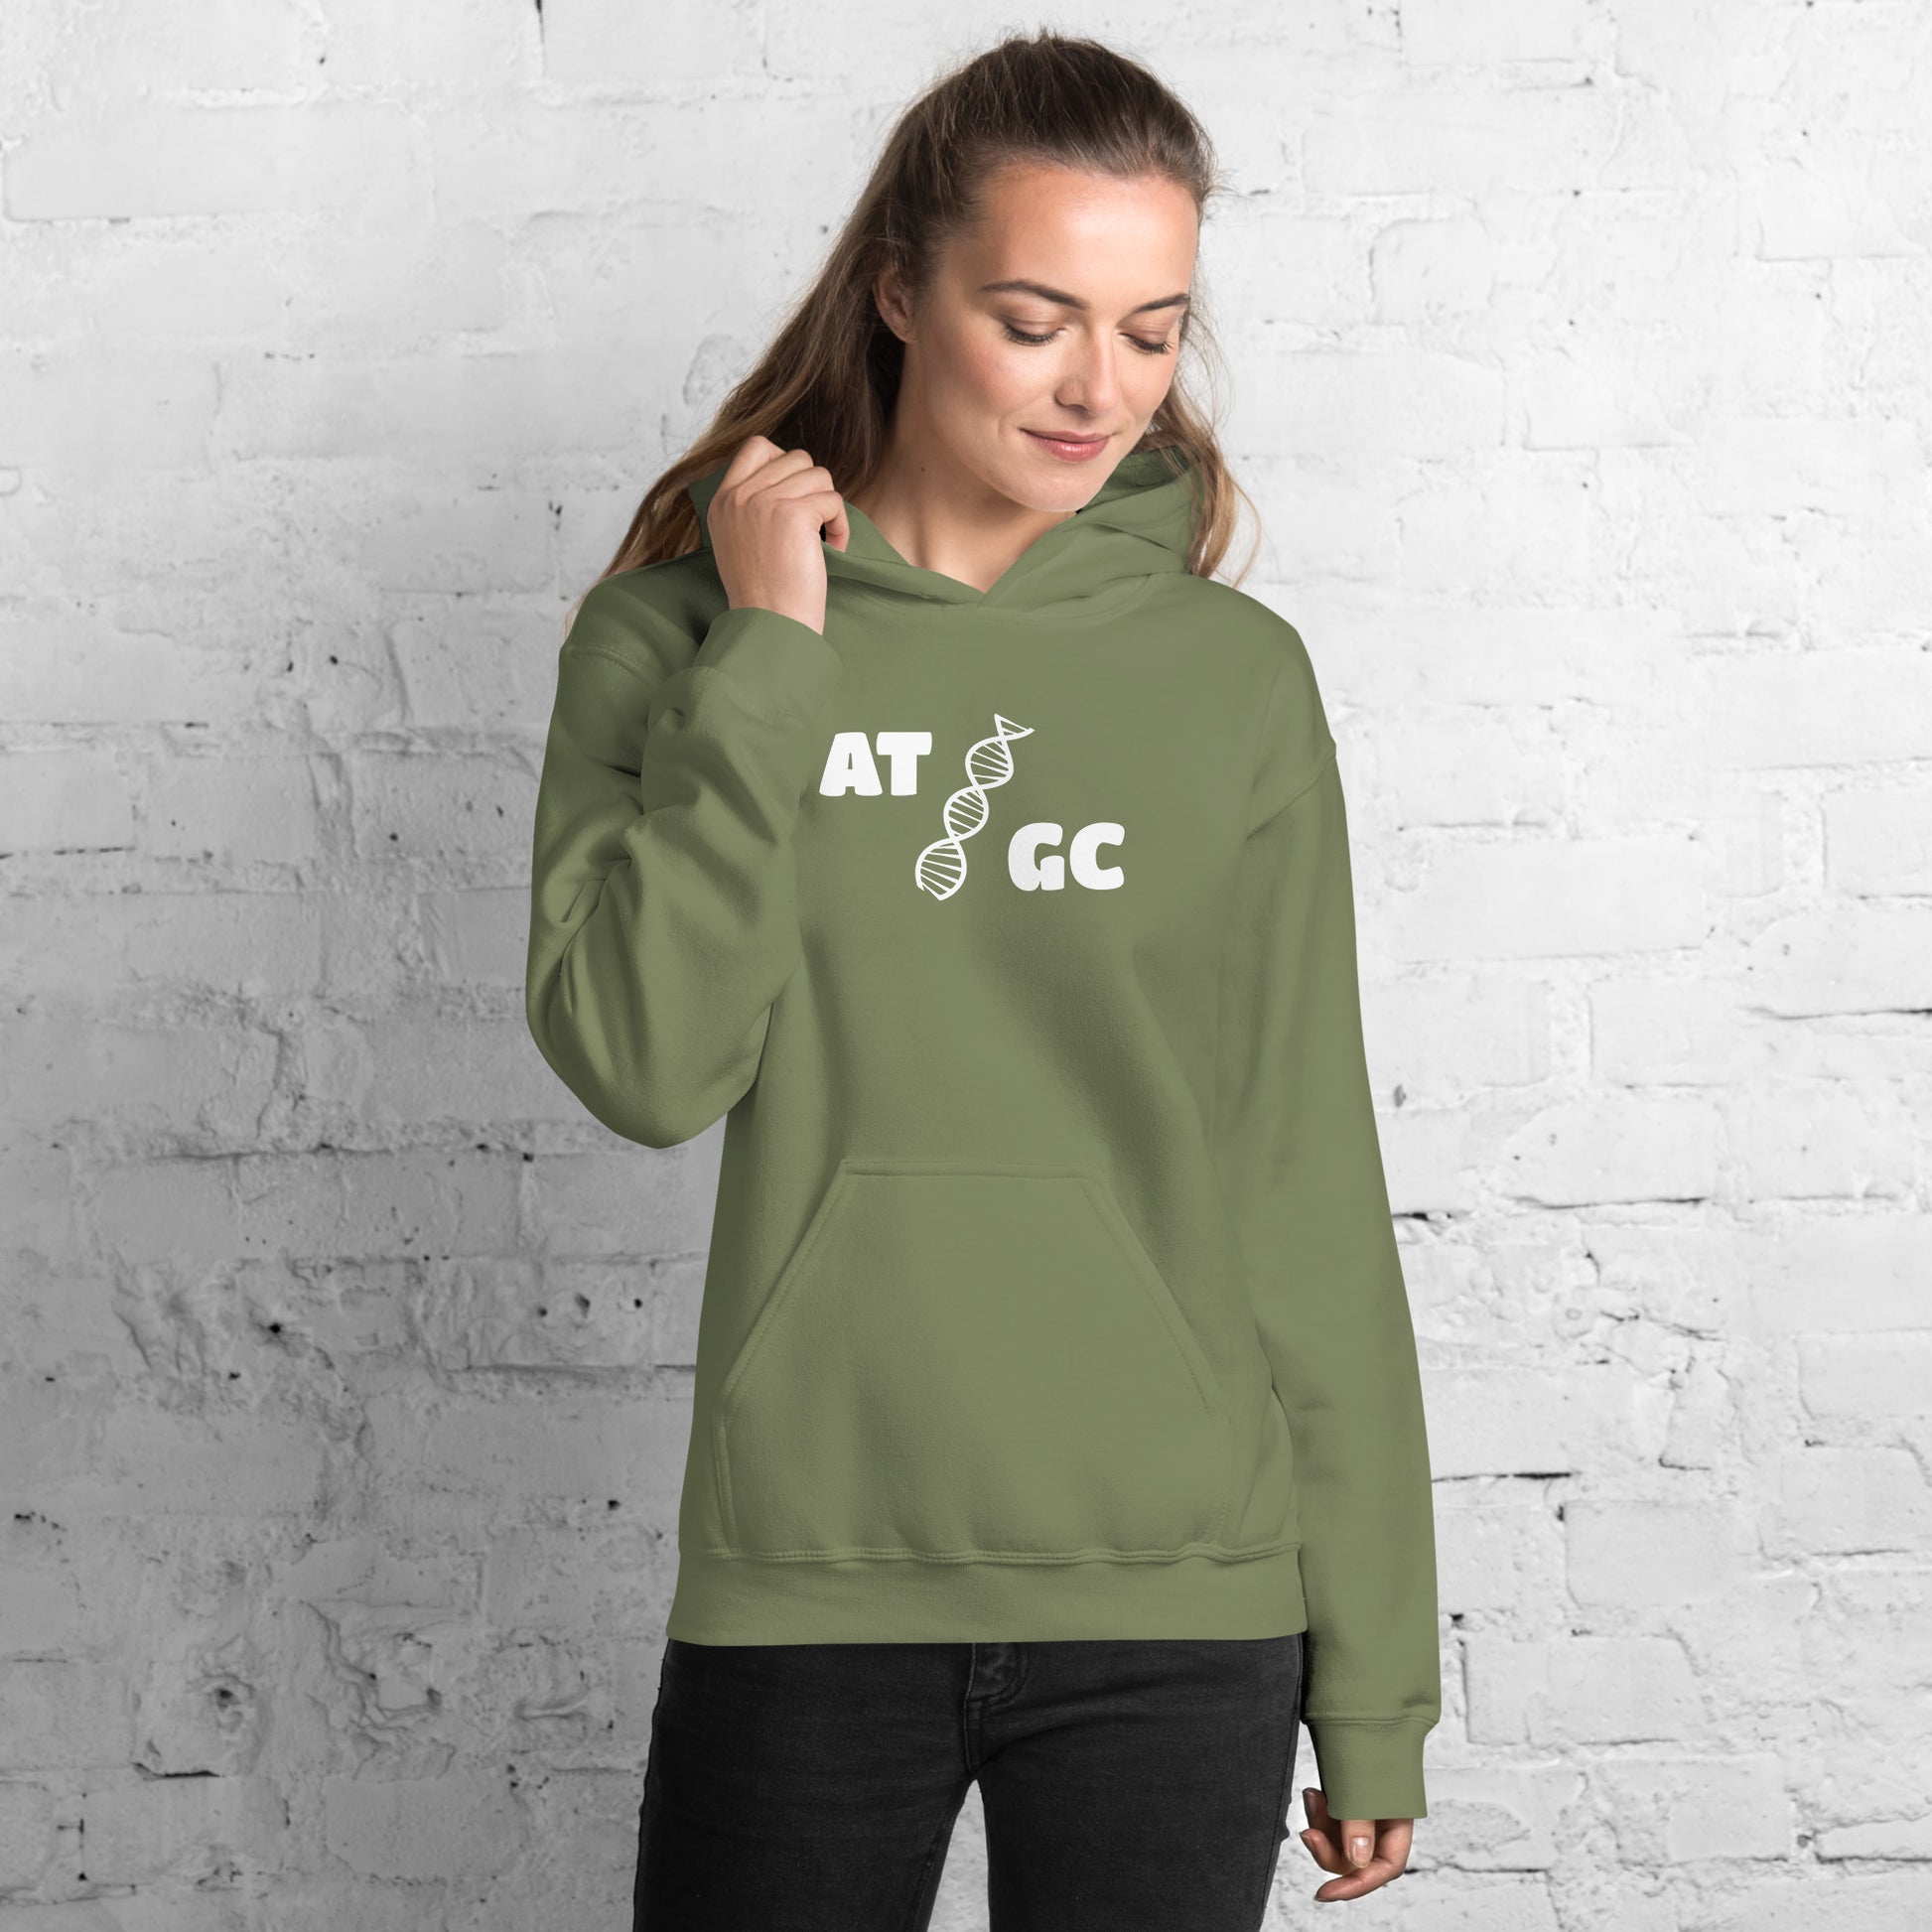 Women with military green hoodie with image of a DNA string and the text "ATGC"